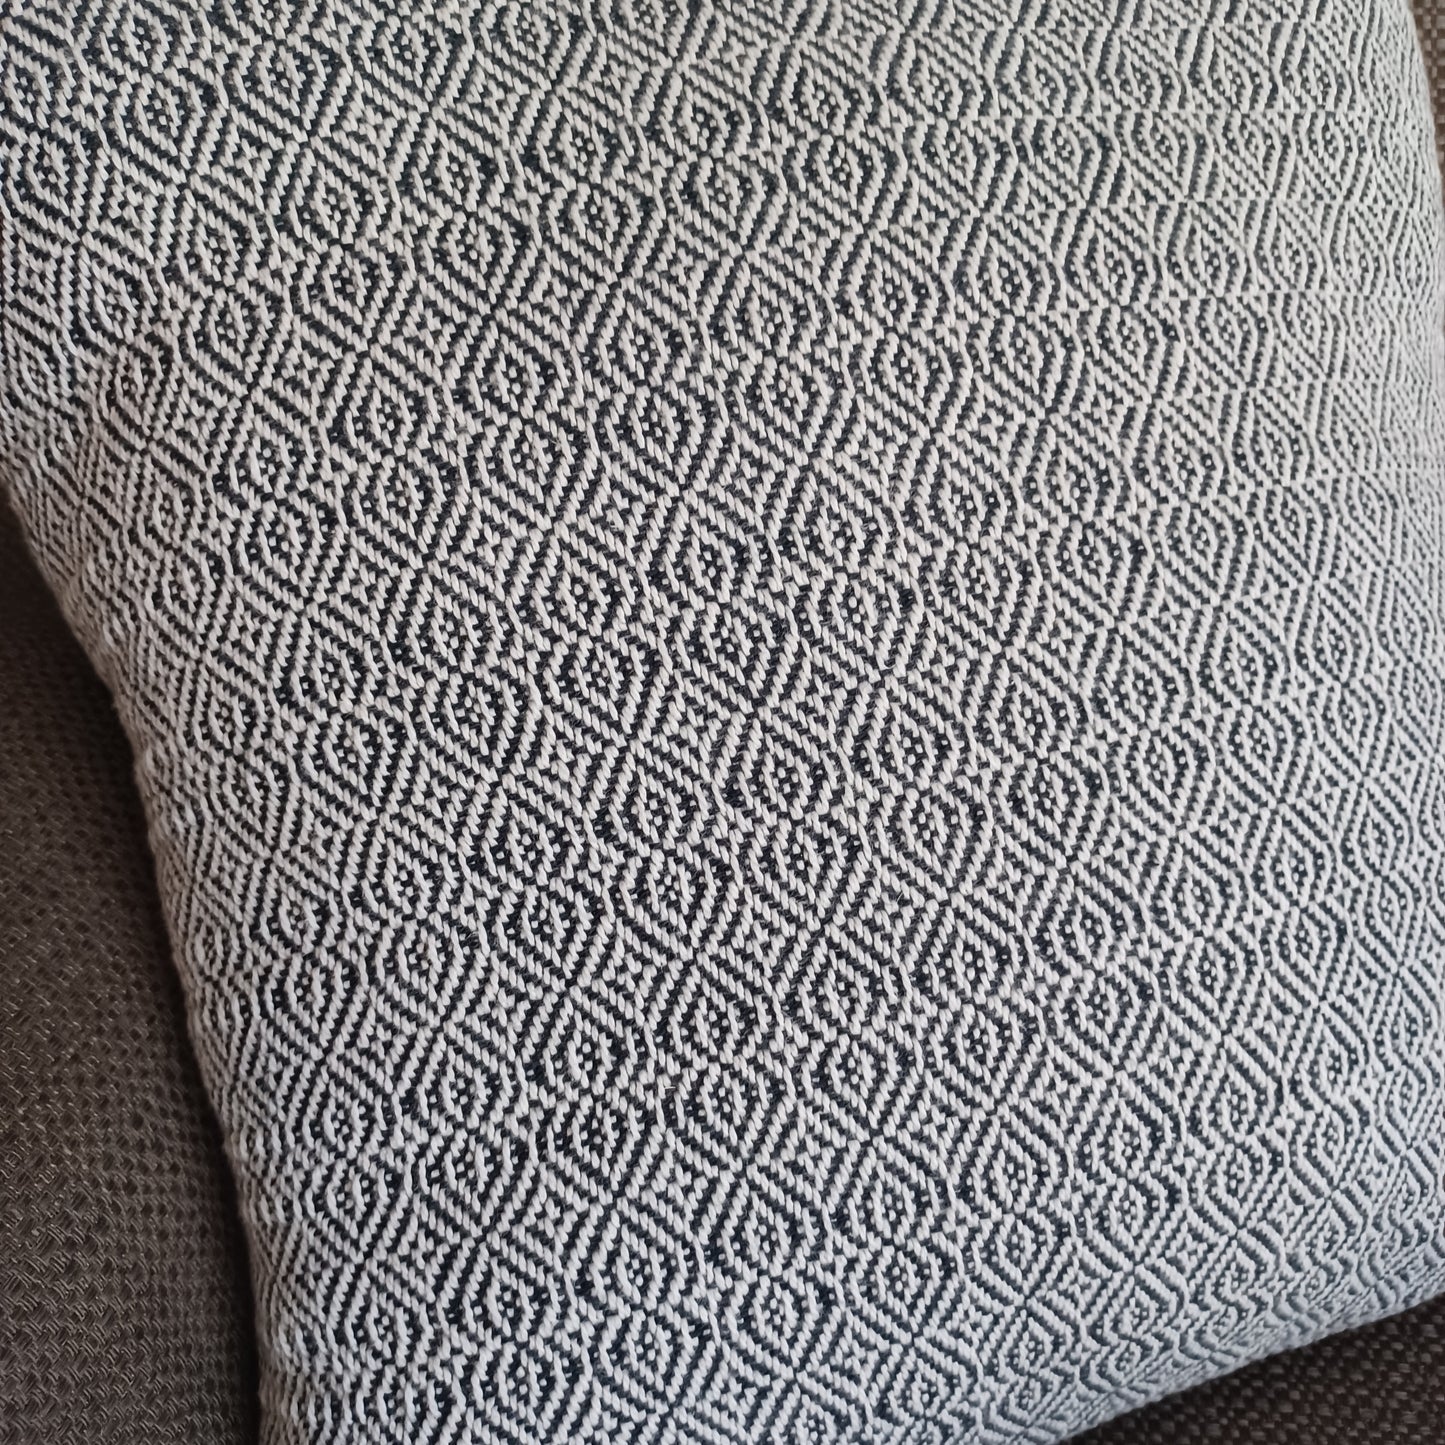 Pillow Cover, Black and White